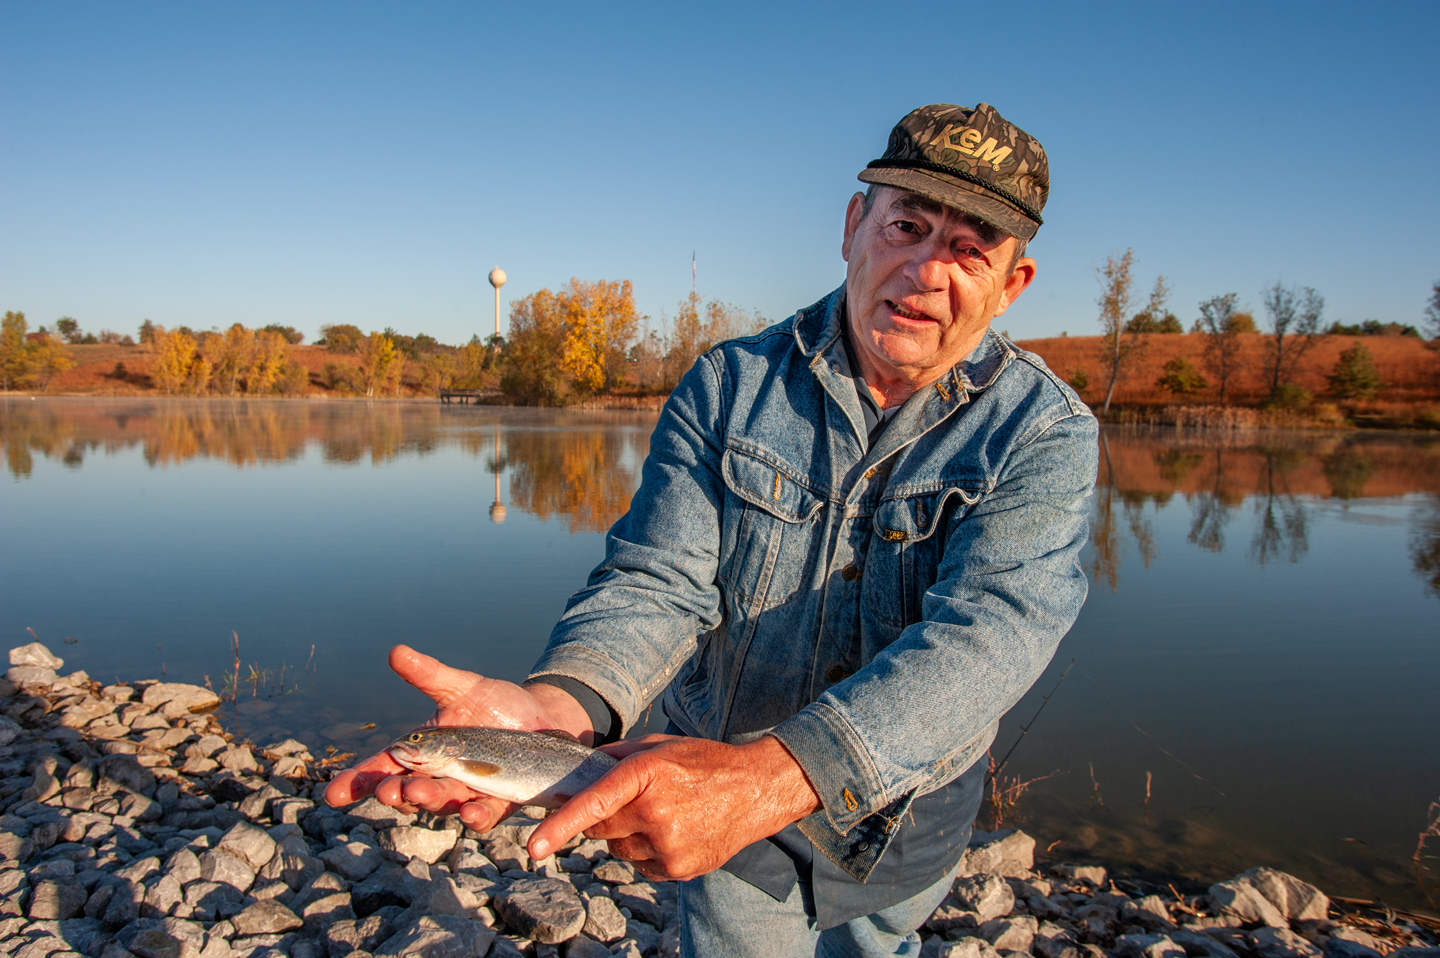 Read More: Still time to fish for stocked rainbow trout this fall